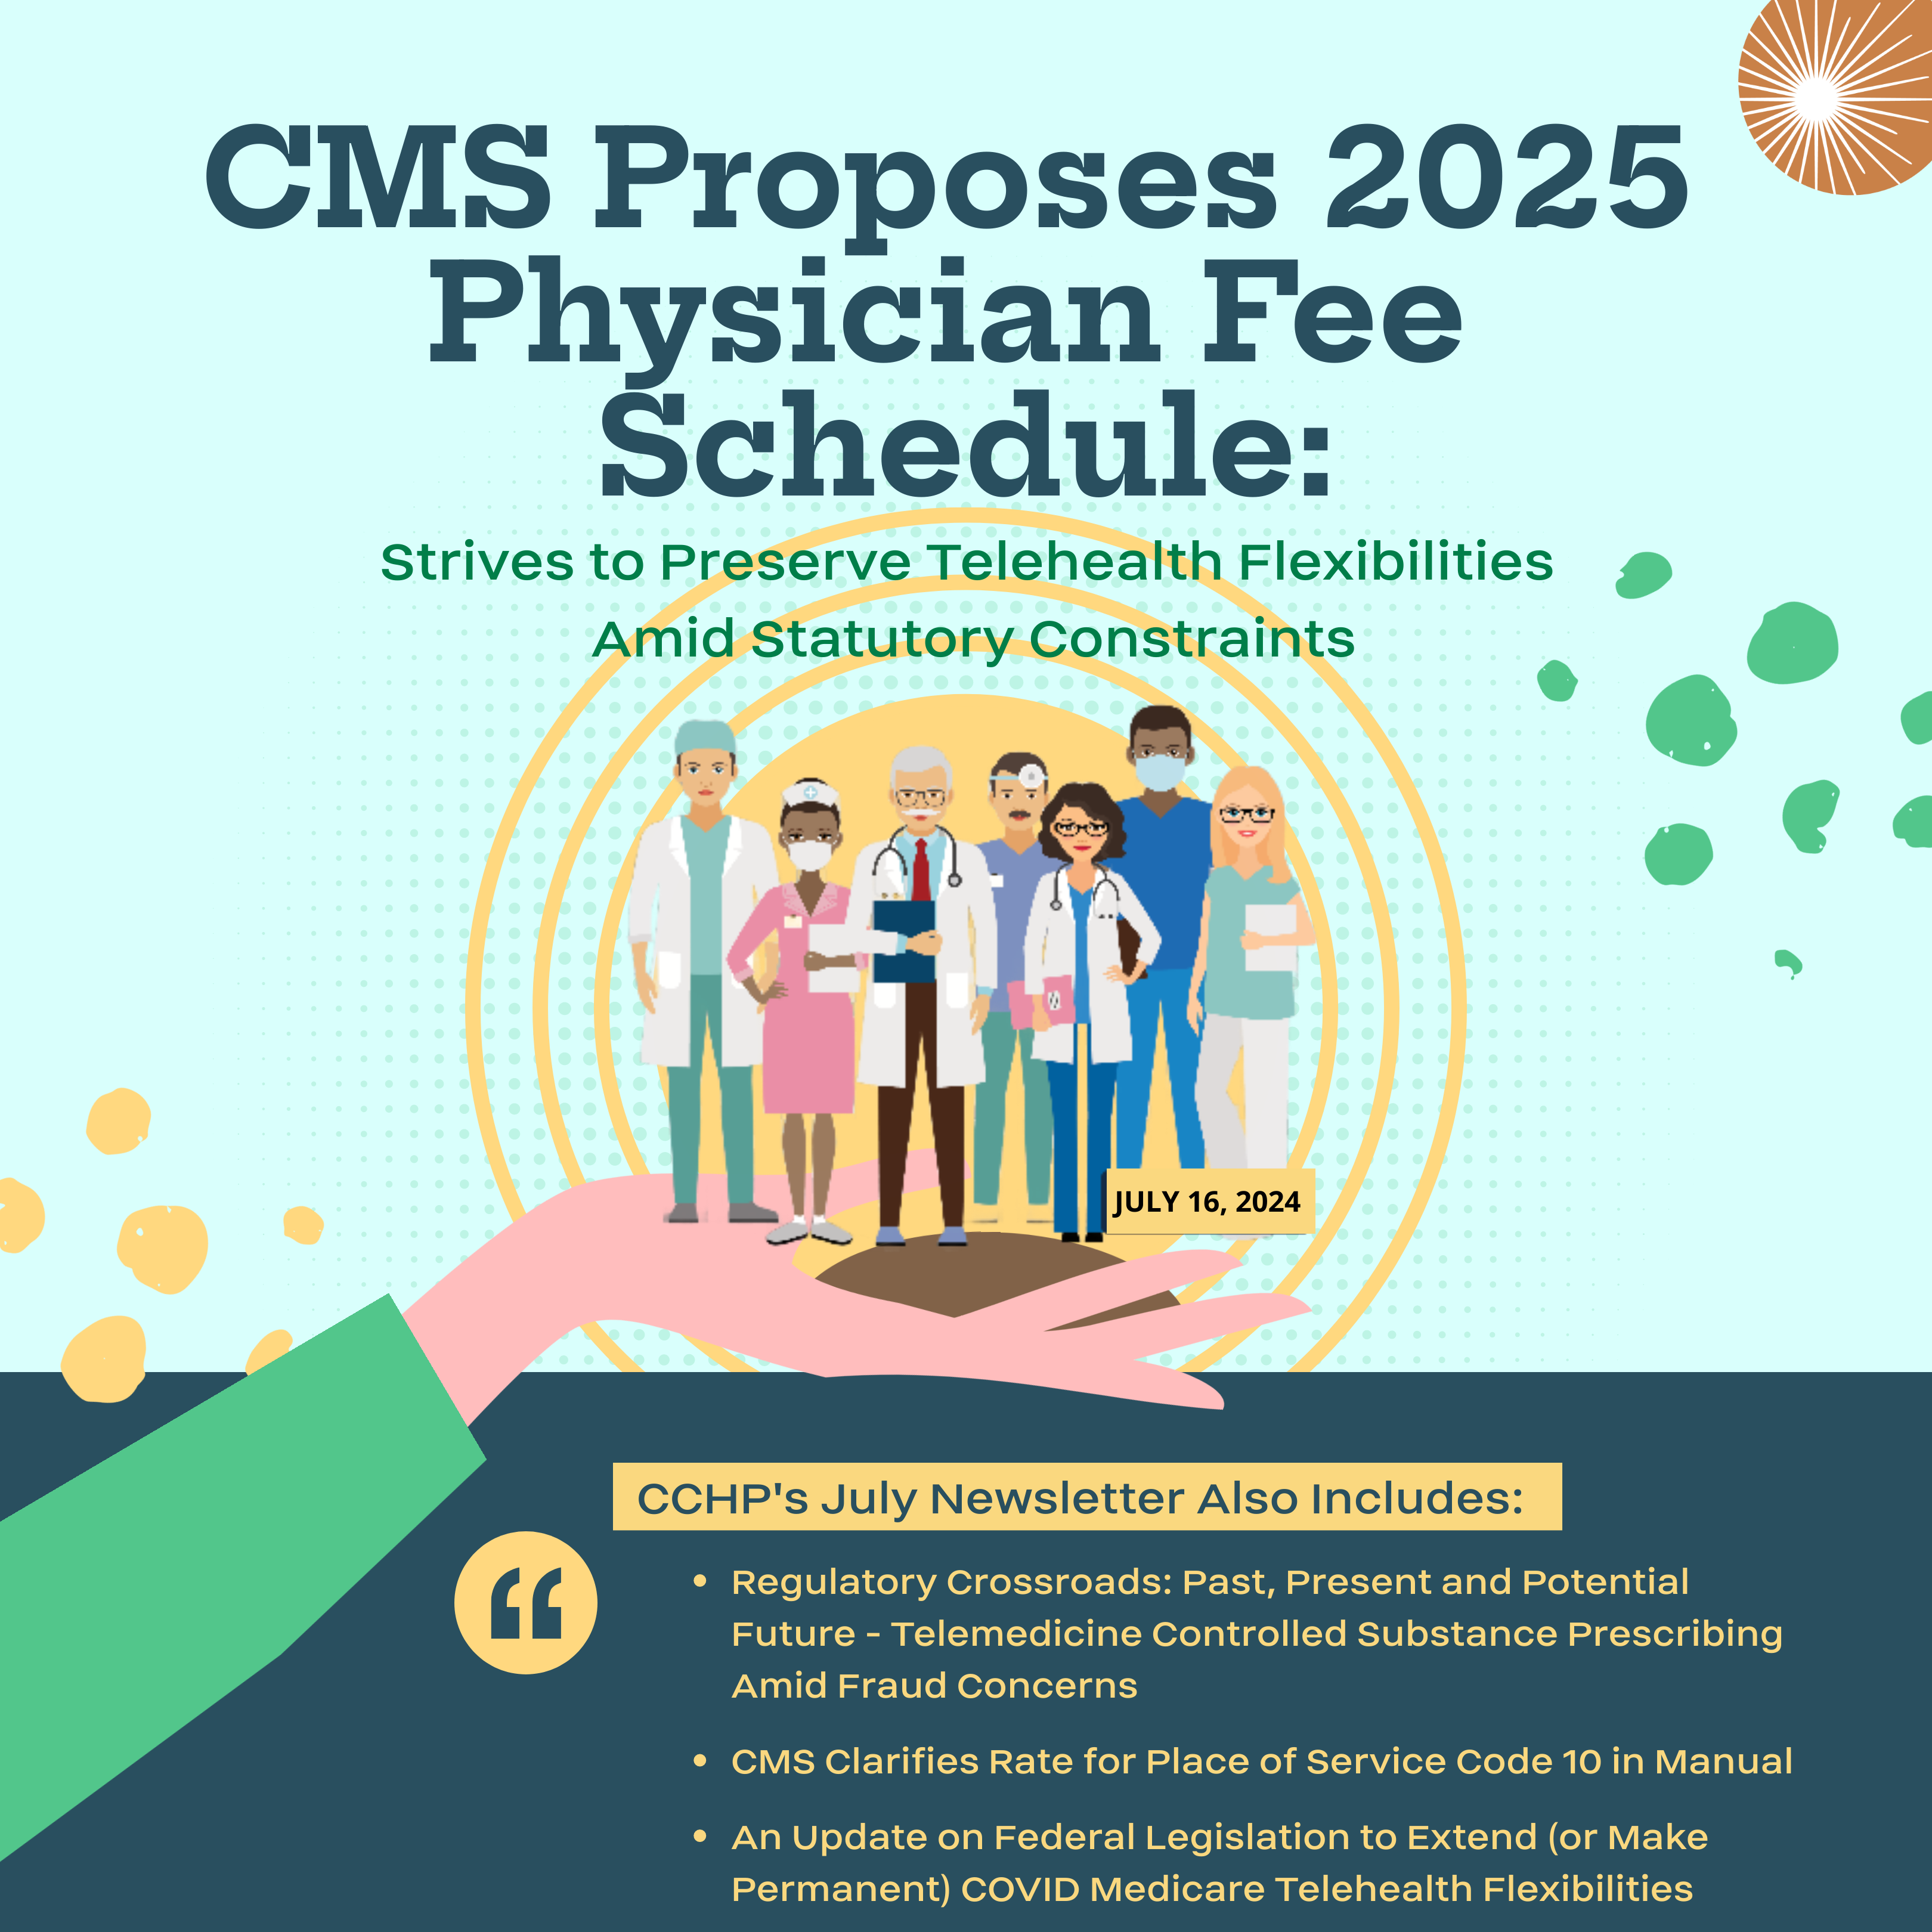 CMS Proposes 2025 Physician Fee Schedule, Strives to Preserve Telehealth Flexibilities Amid Statutory Constraints